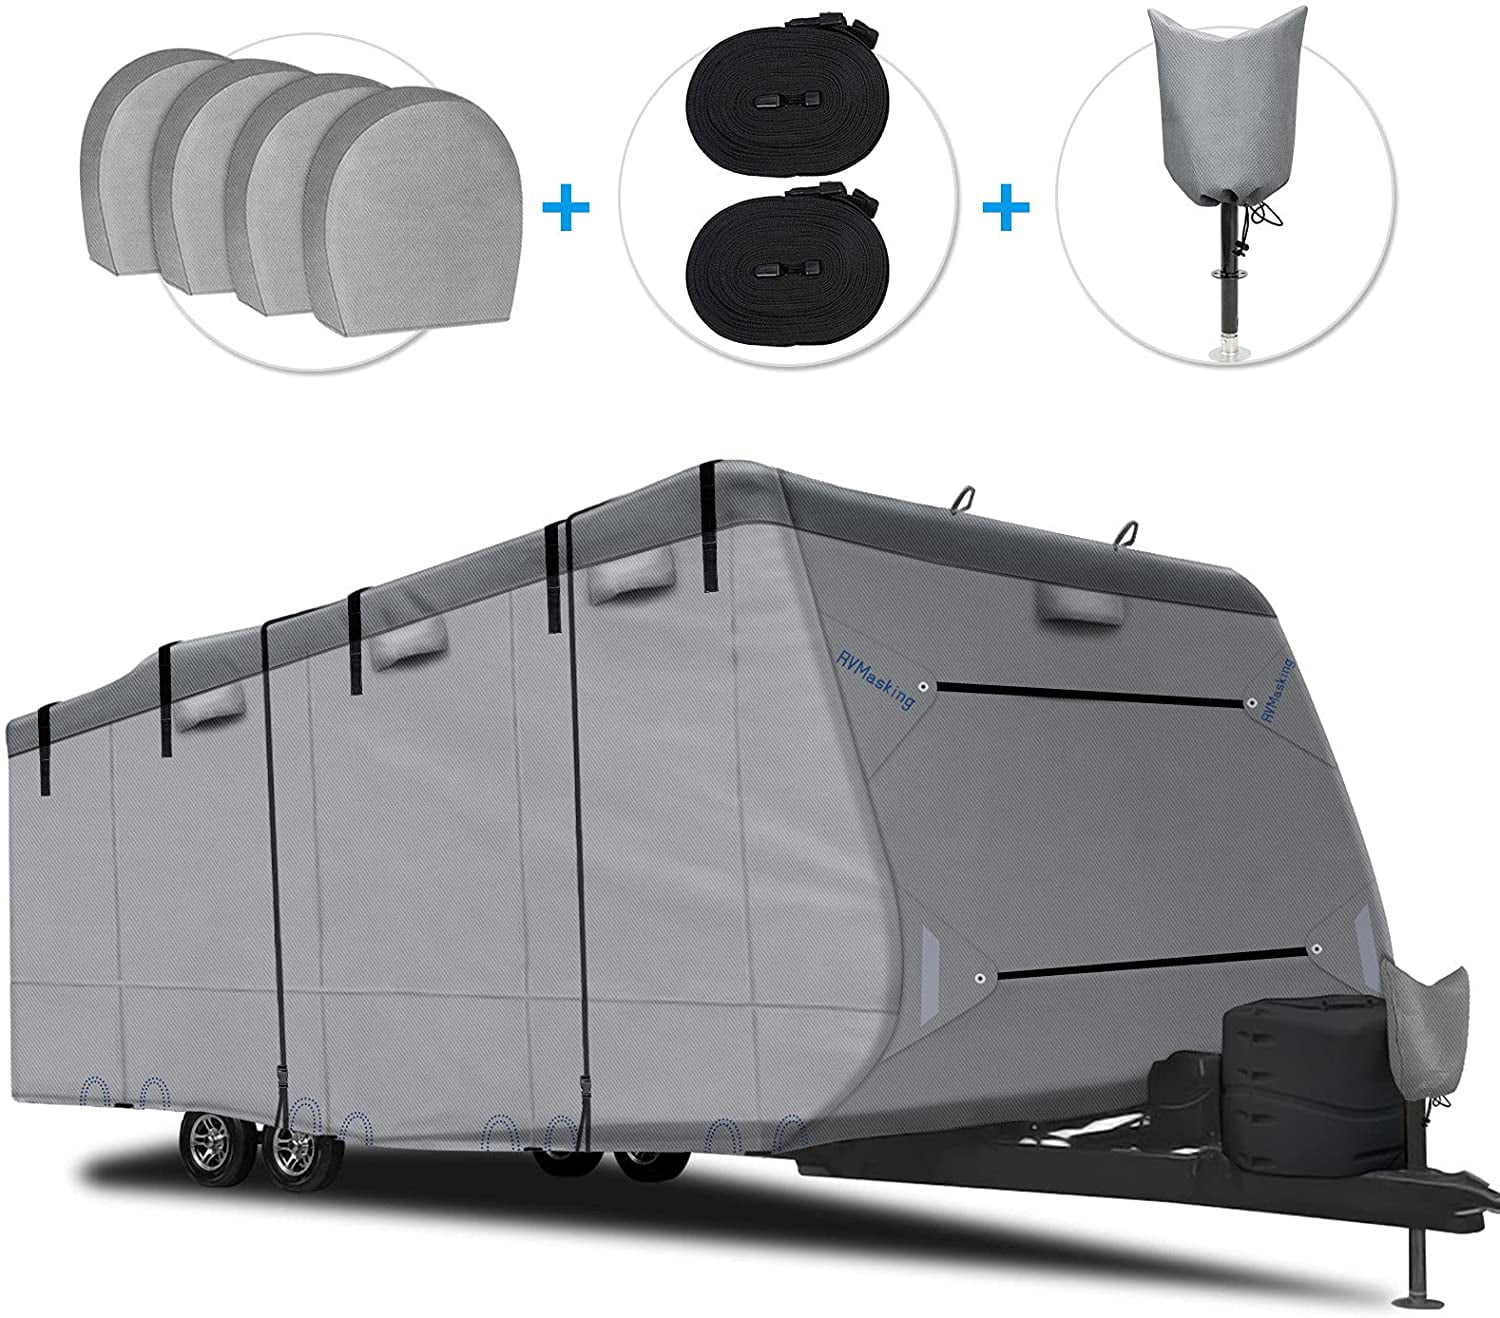 Tongue Jack Cover Anti-uv Prevent Top Tearing Due to Sun Exposure RV Cover Windproof Upgraded Extra Thick 4 Layers Top Travel Trailer RV Cover Camper Cover with 4 Tire Covers 